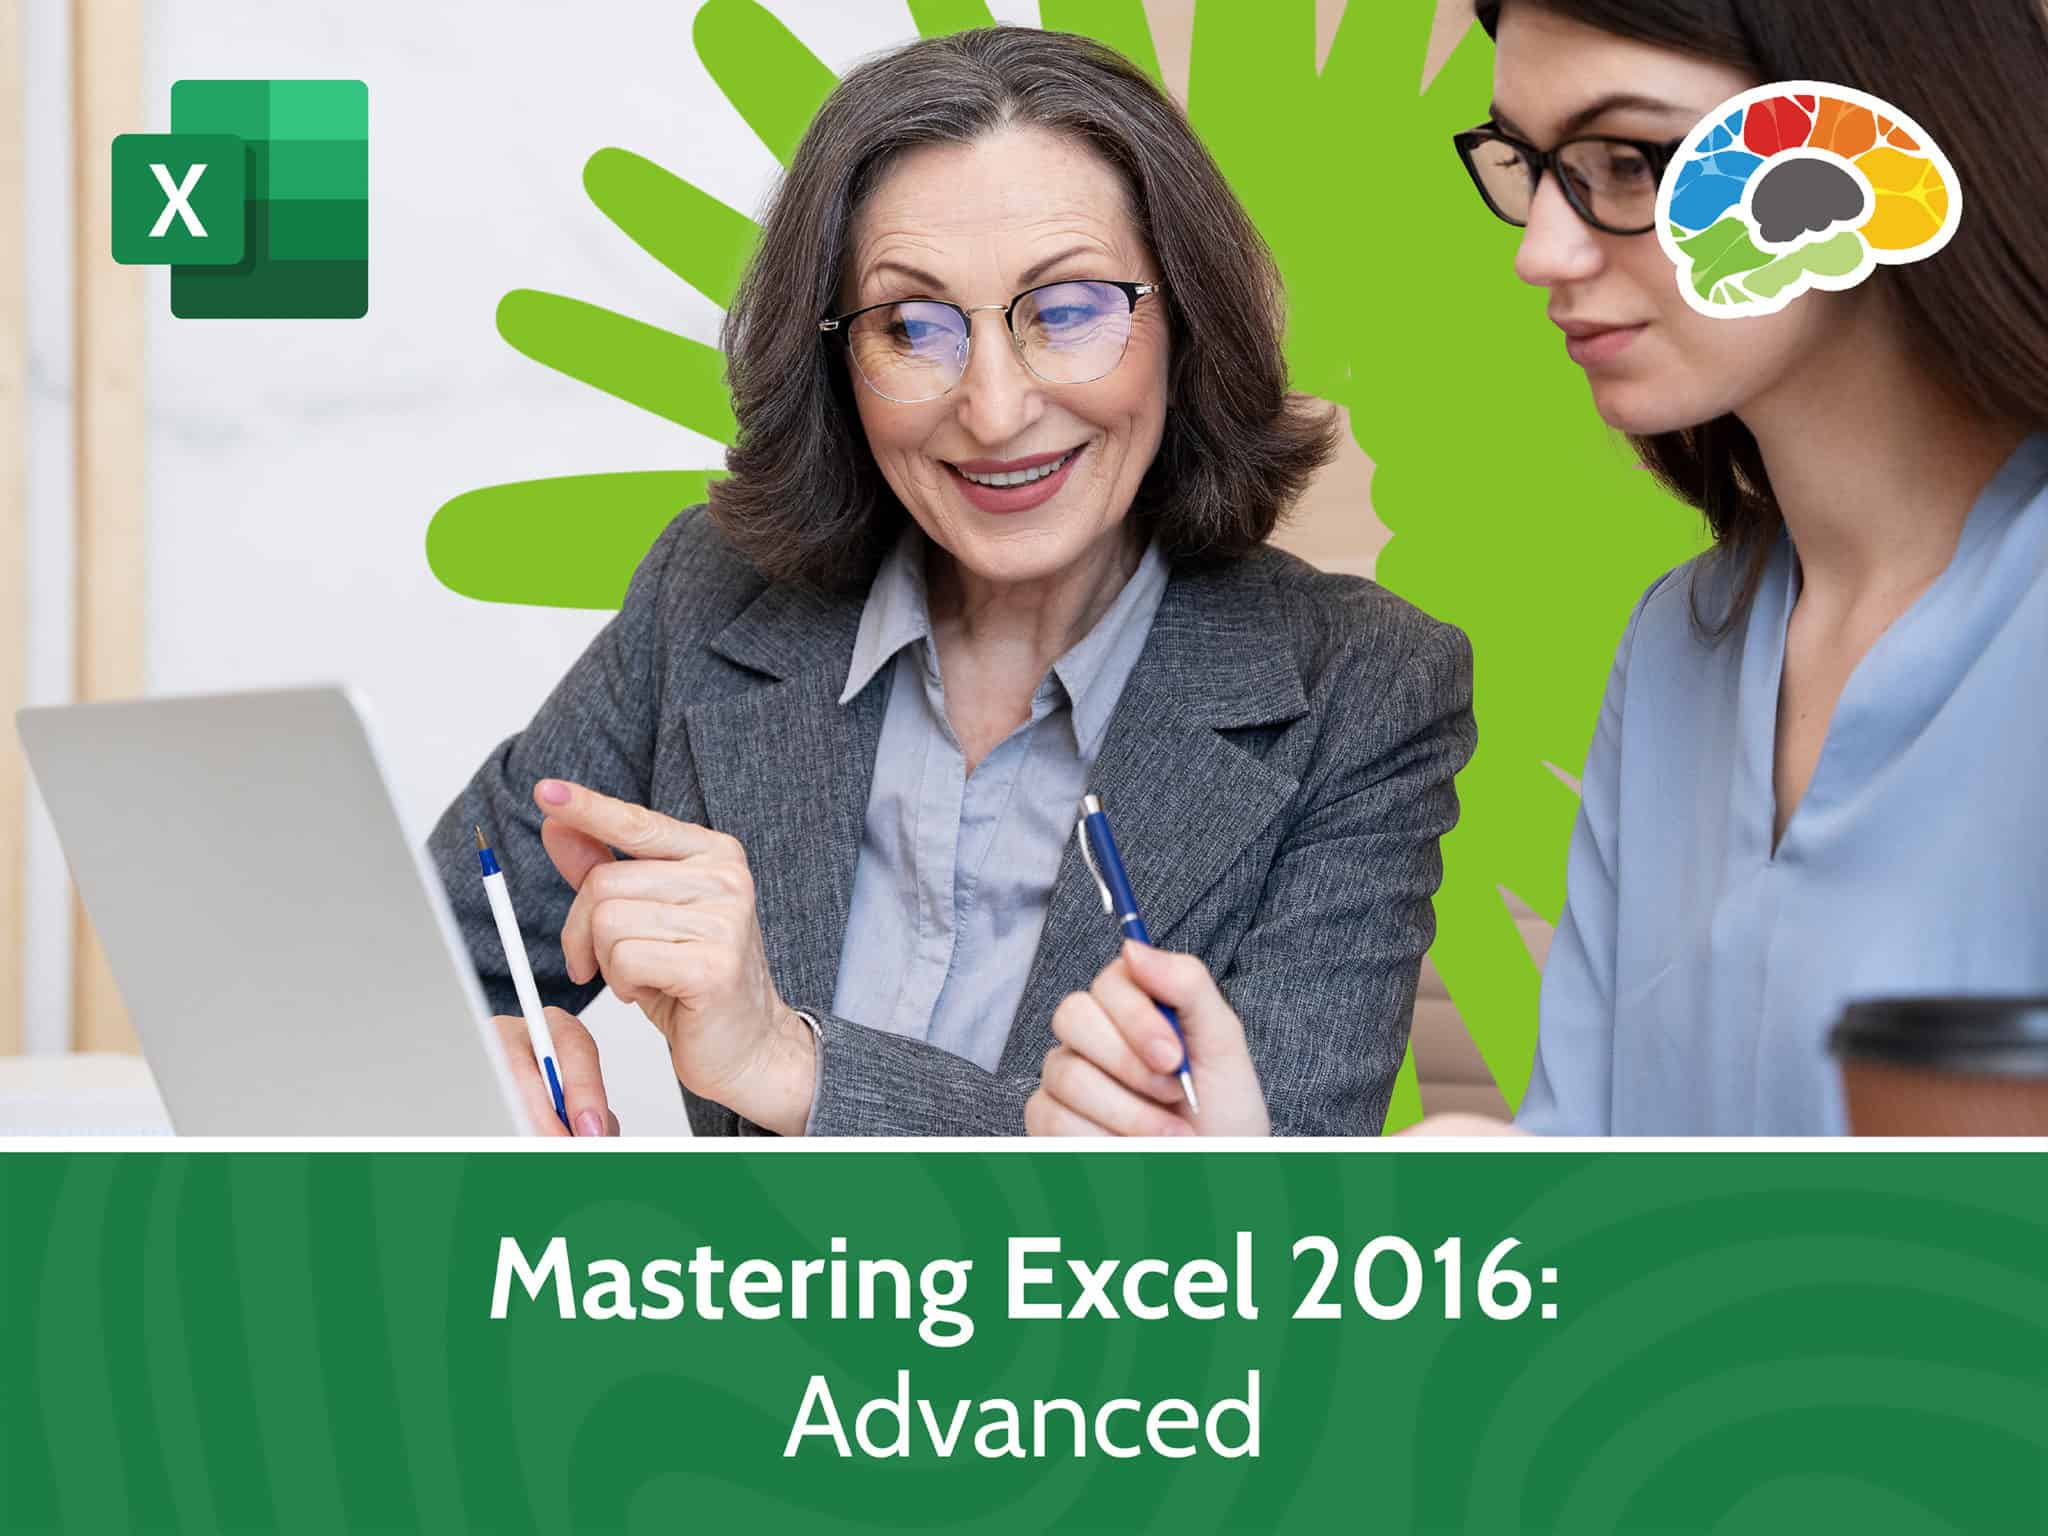 Mastering Excel 2016 – Advanced scaled